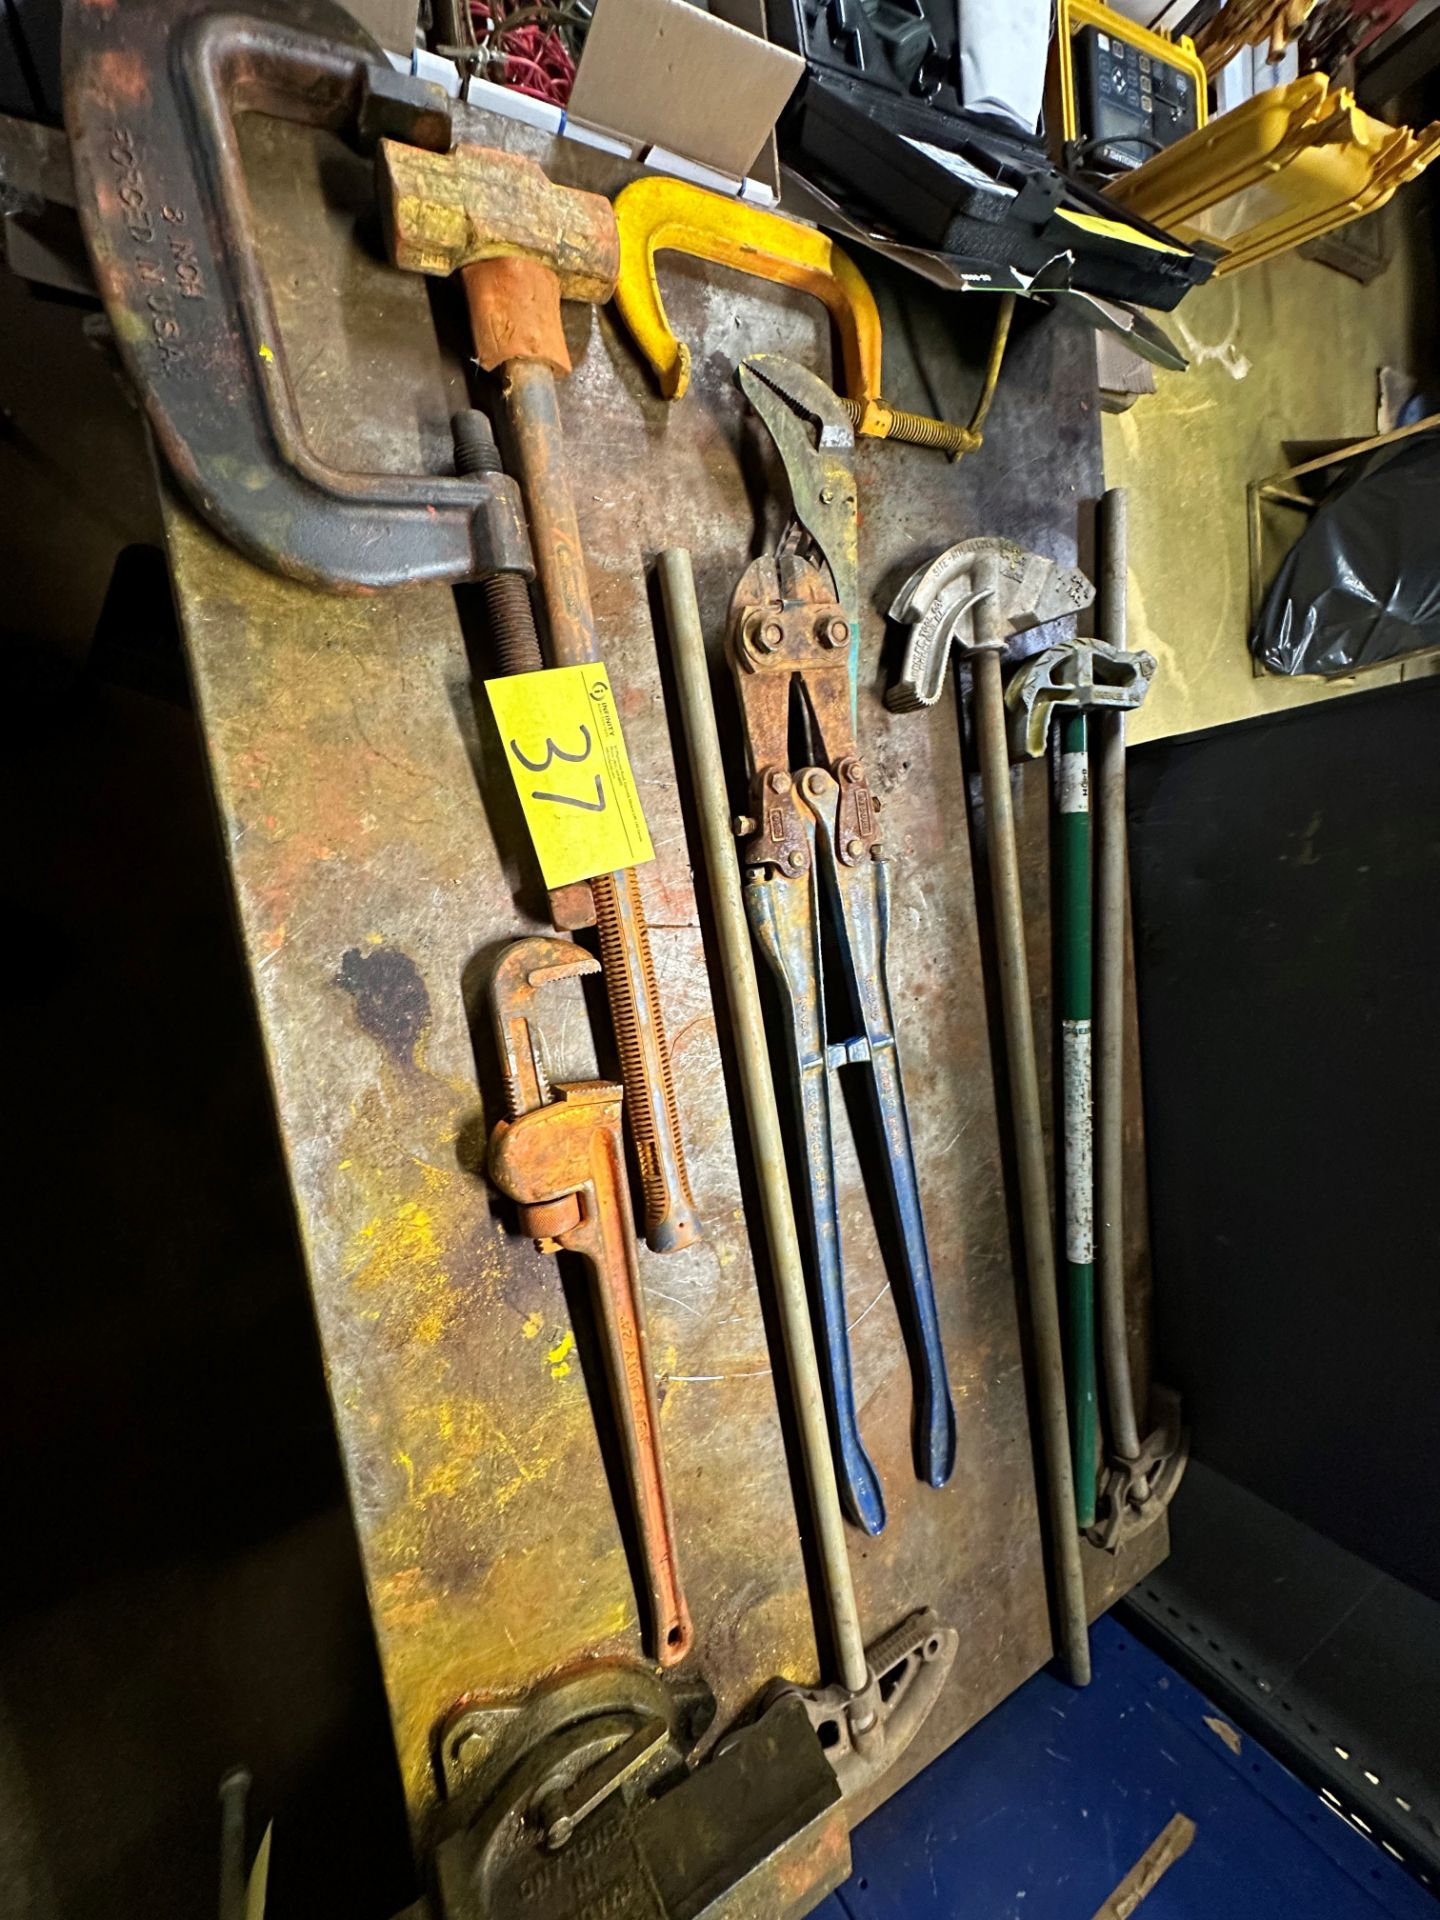 LOT OF CONDUIT BENDERS, BOLT CUTTERS, SLEDGE HAMMER, PIPE WRENCHES, CHANNEL LOCK, C-CLAMPS ON TABLE